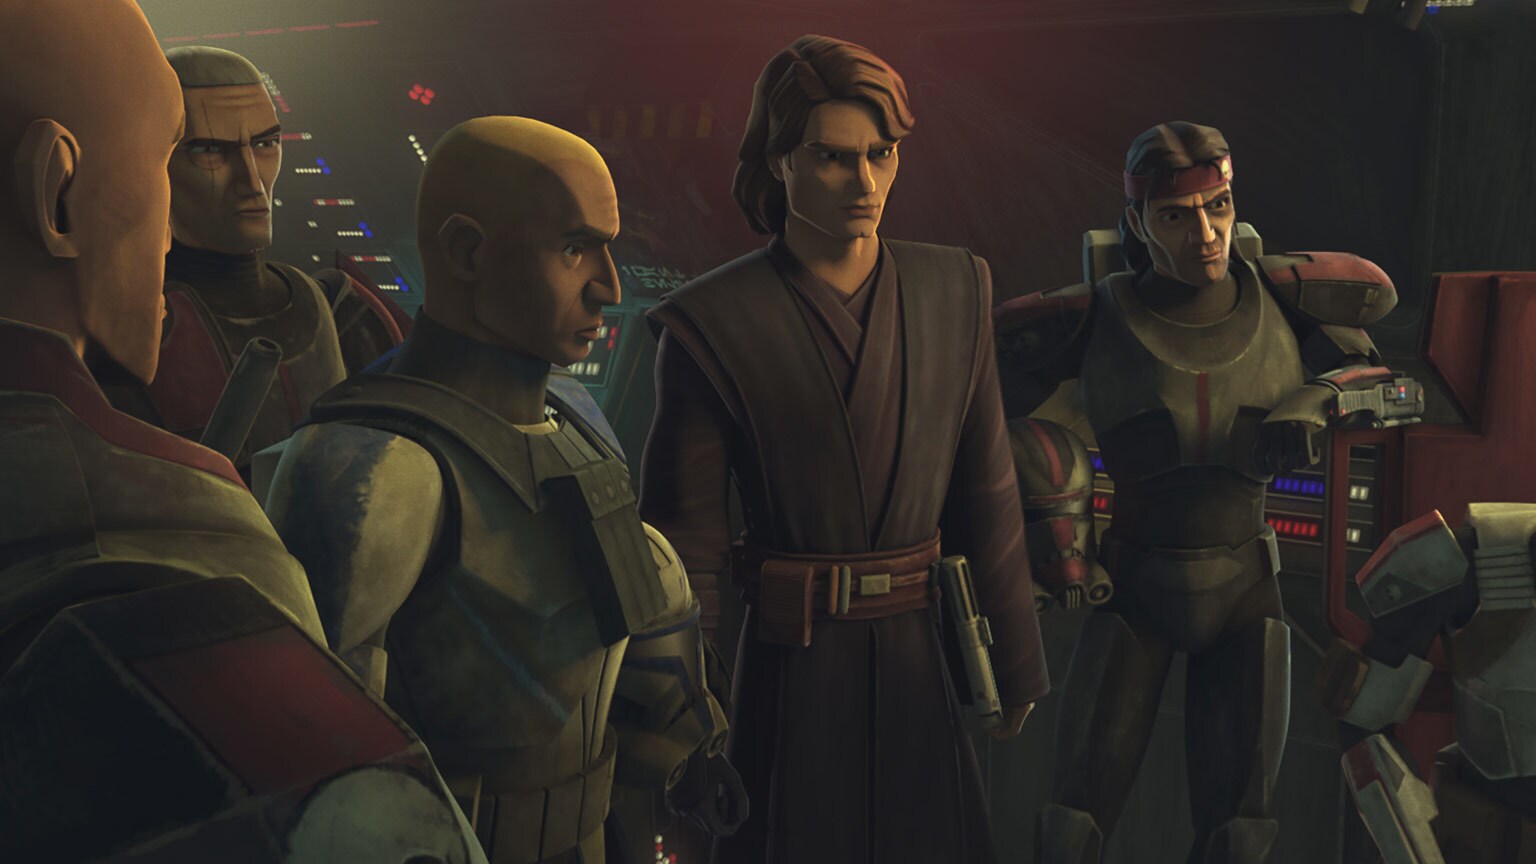 The Clone Wars Rewatch: "A Distant Echo" of Truth